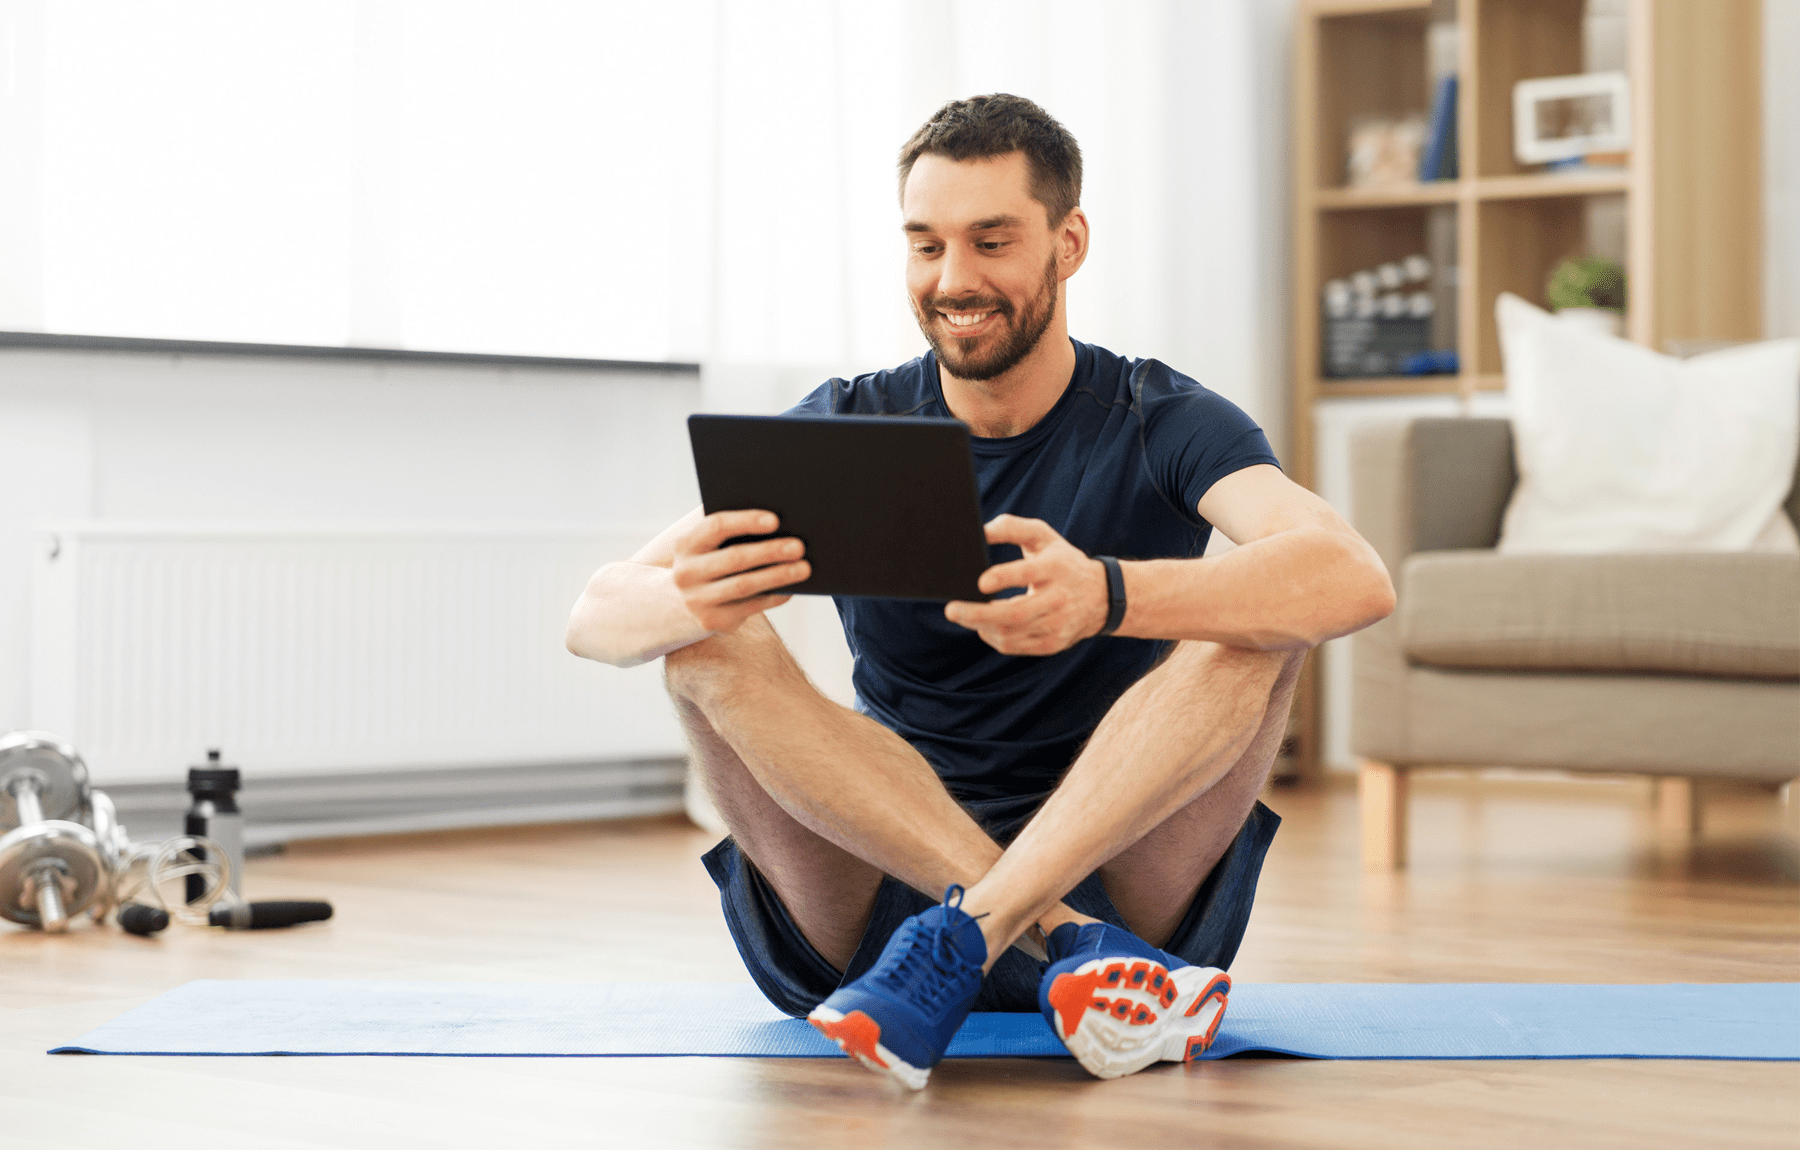 Virtual fitness is a great option when traveling.